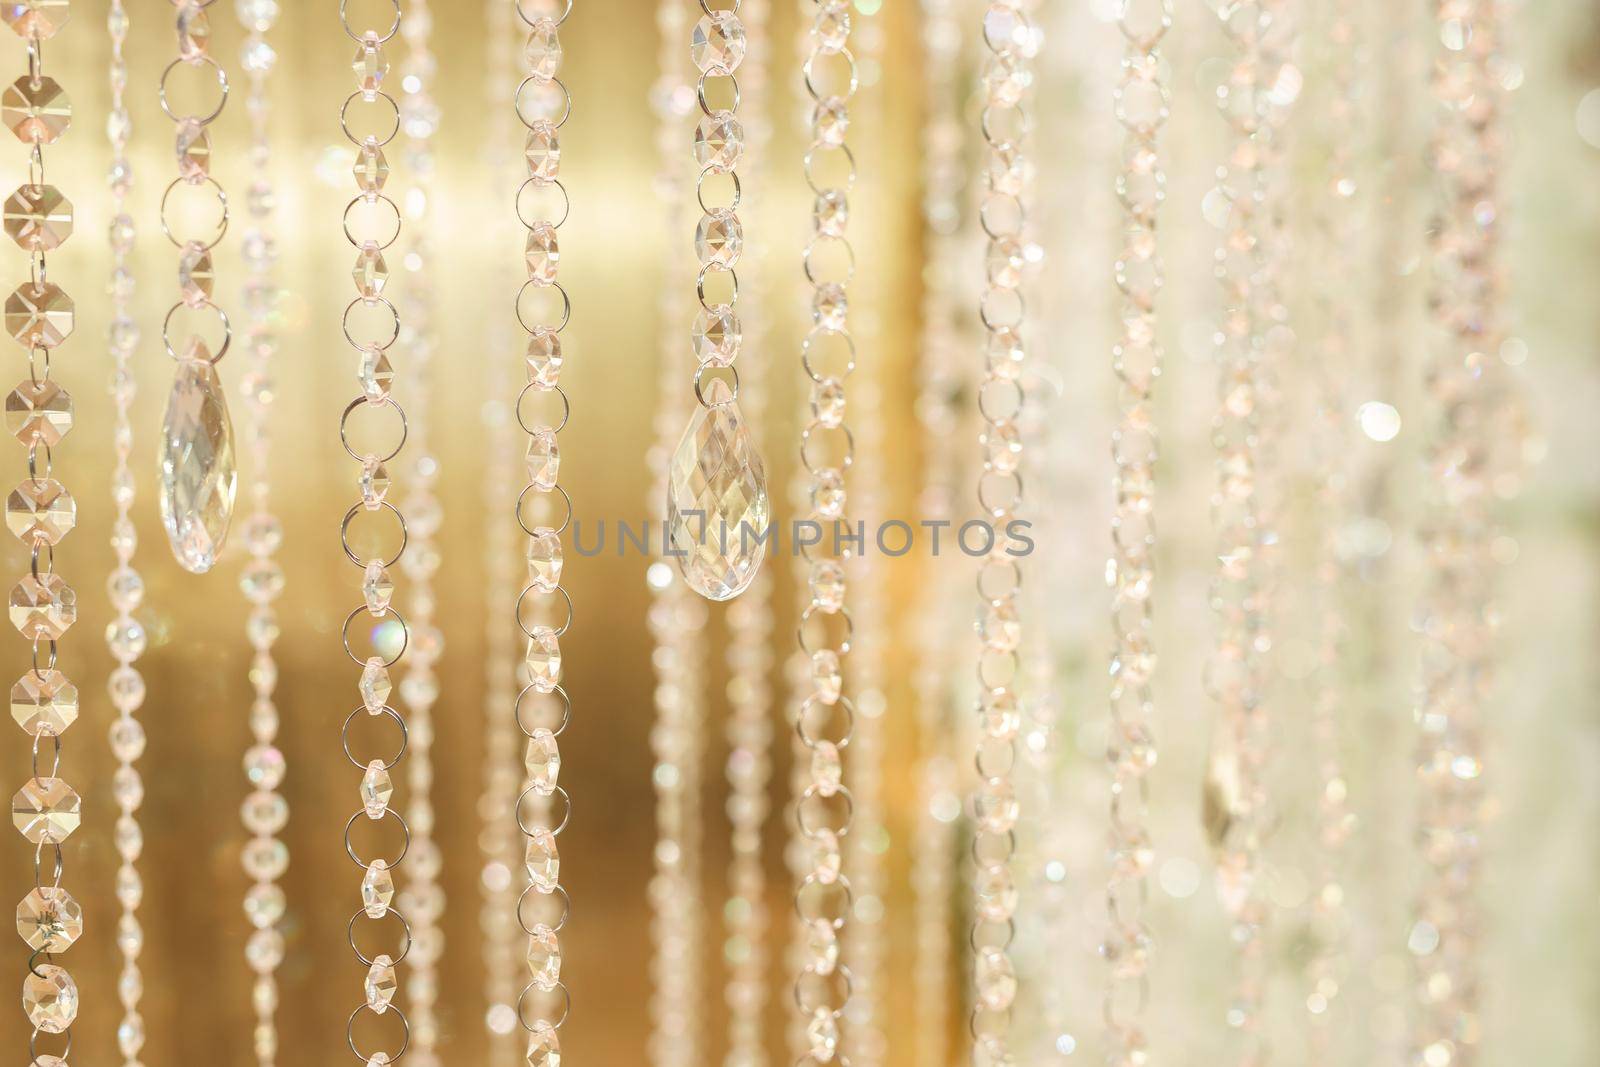 Hanging glass and shiny beads are an element of the wedding decor by StudioPeace